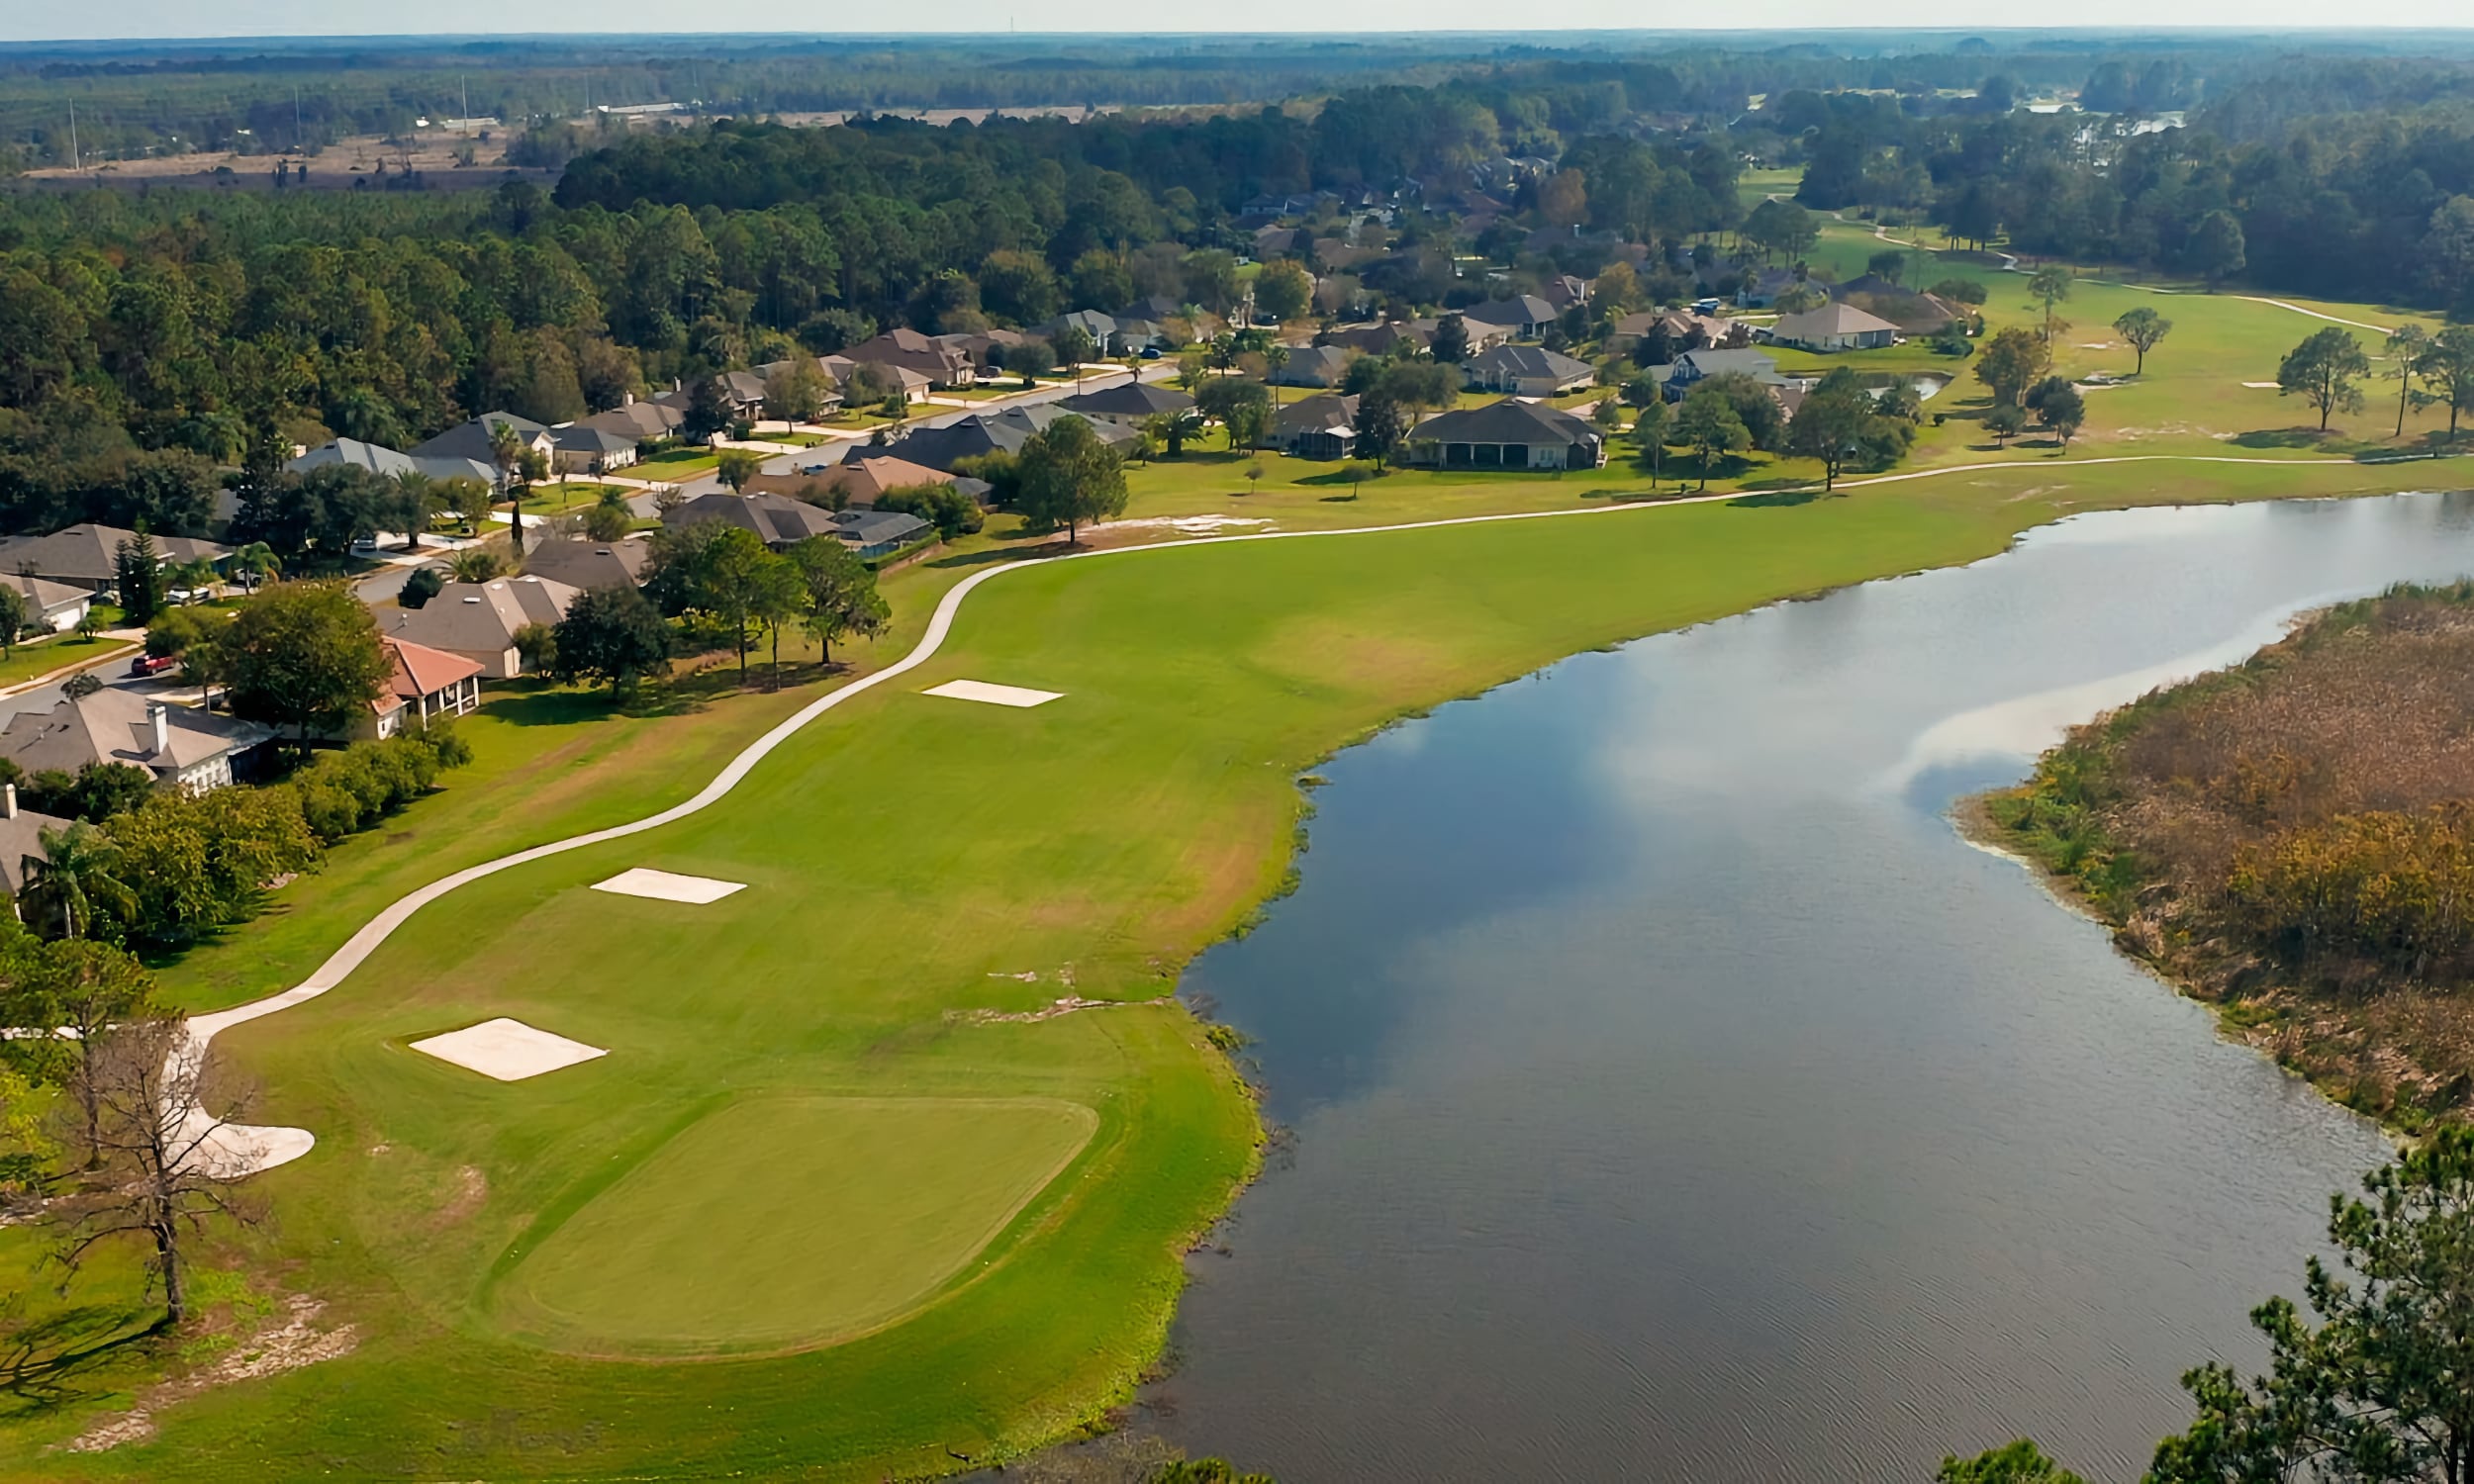 Aerial view of St. Johns Golf Club fairway, sand bunkers, and a large water hazard snaking through the landscape